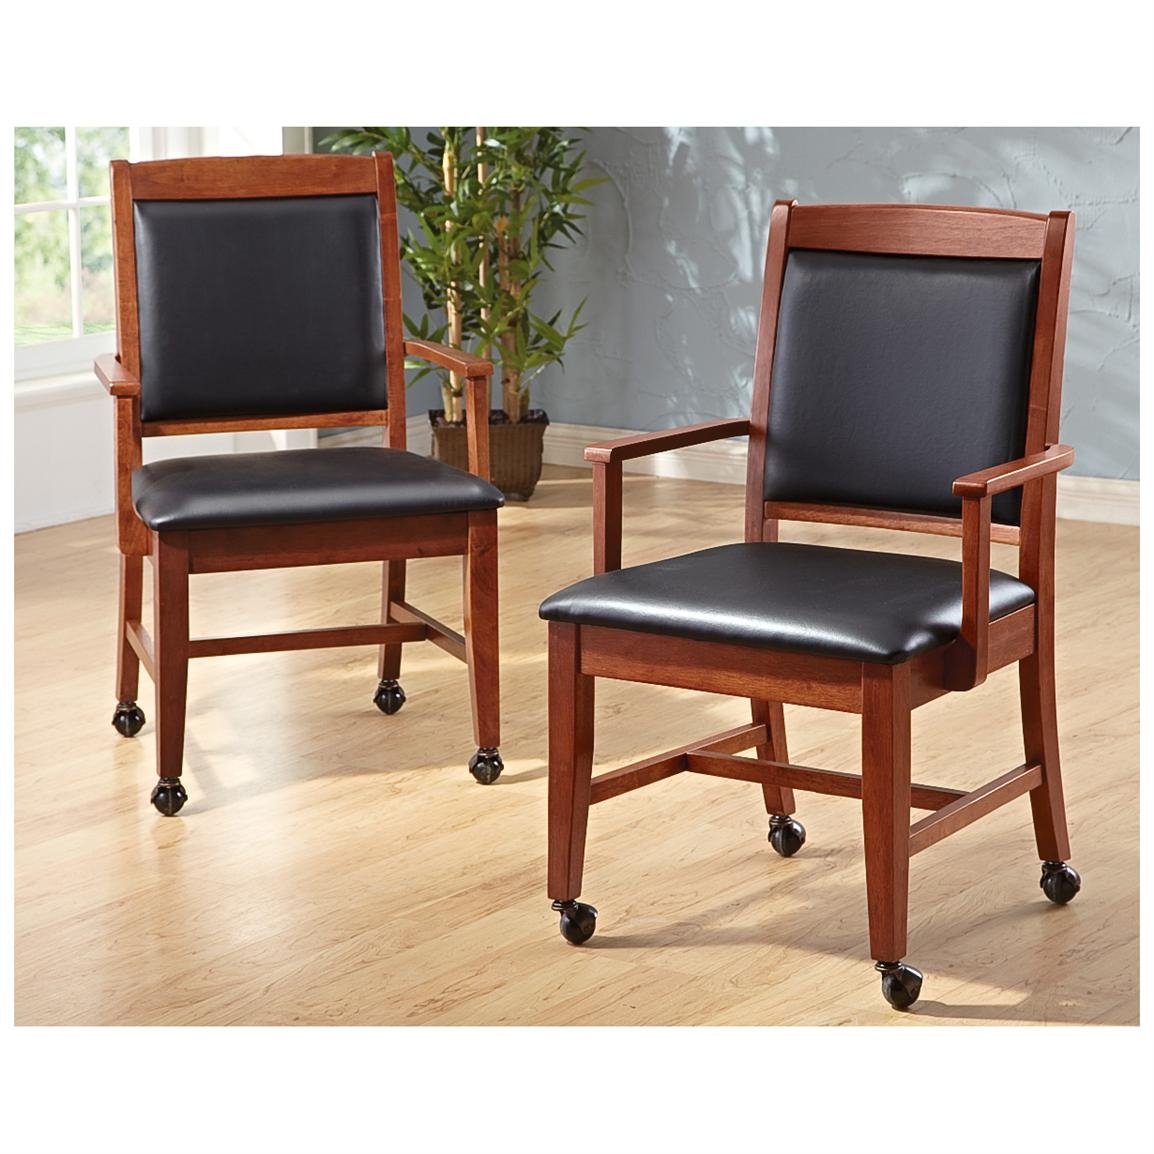 Dining Chairs With Casters You Ll Love, Leather Dining Room Chairs With Wheels